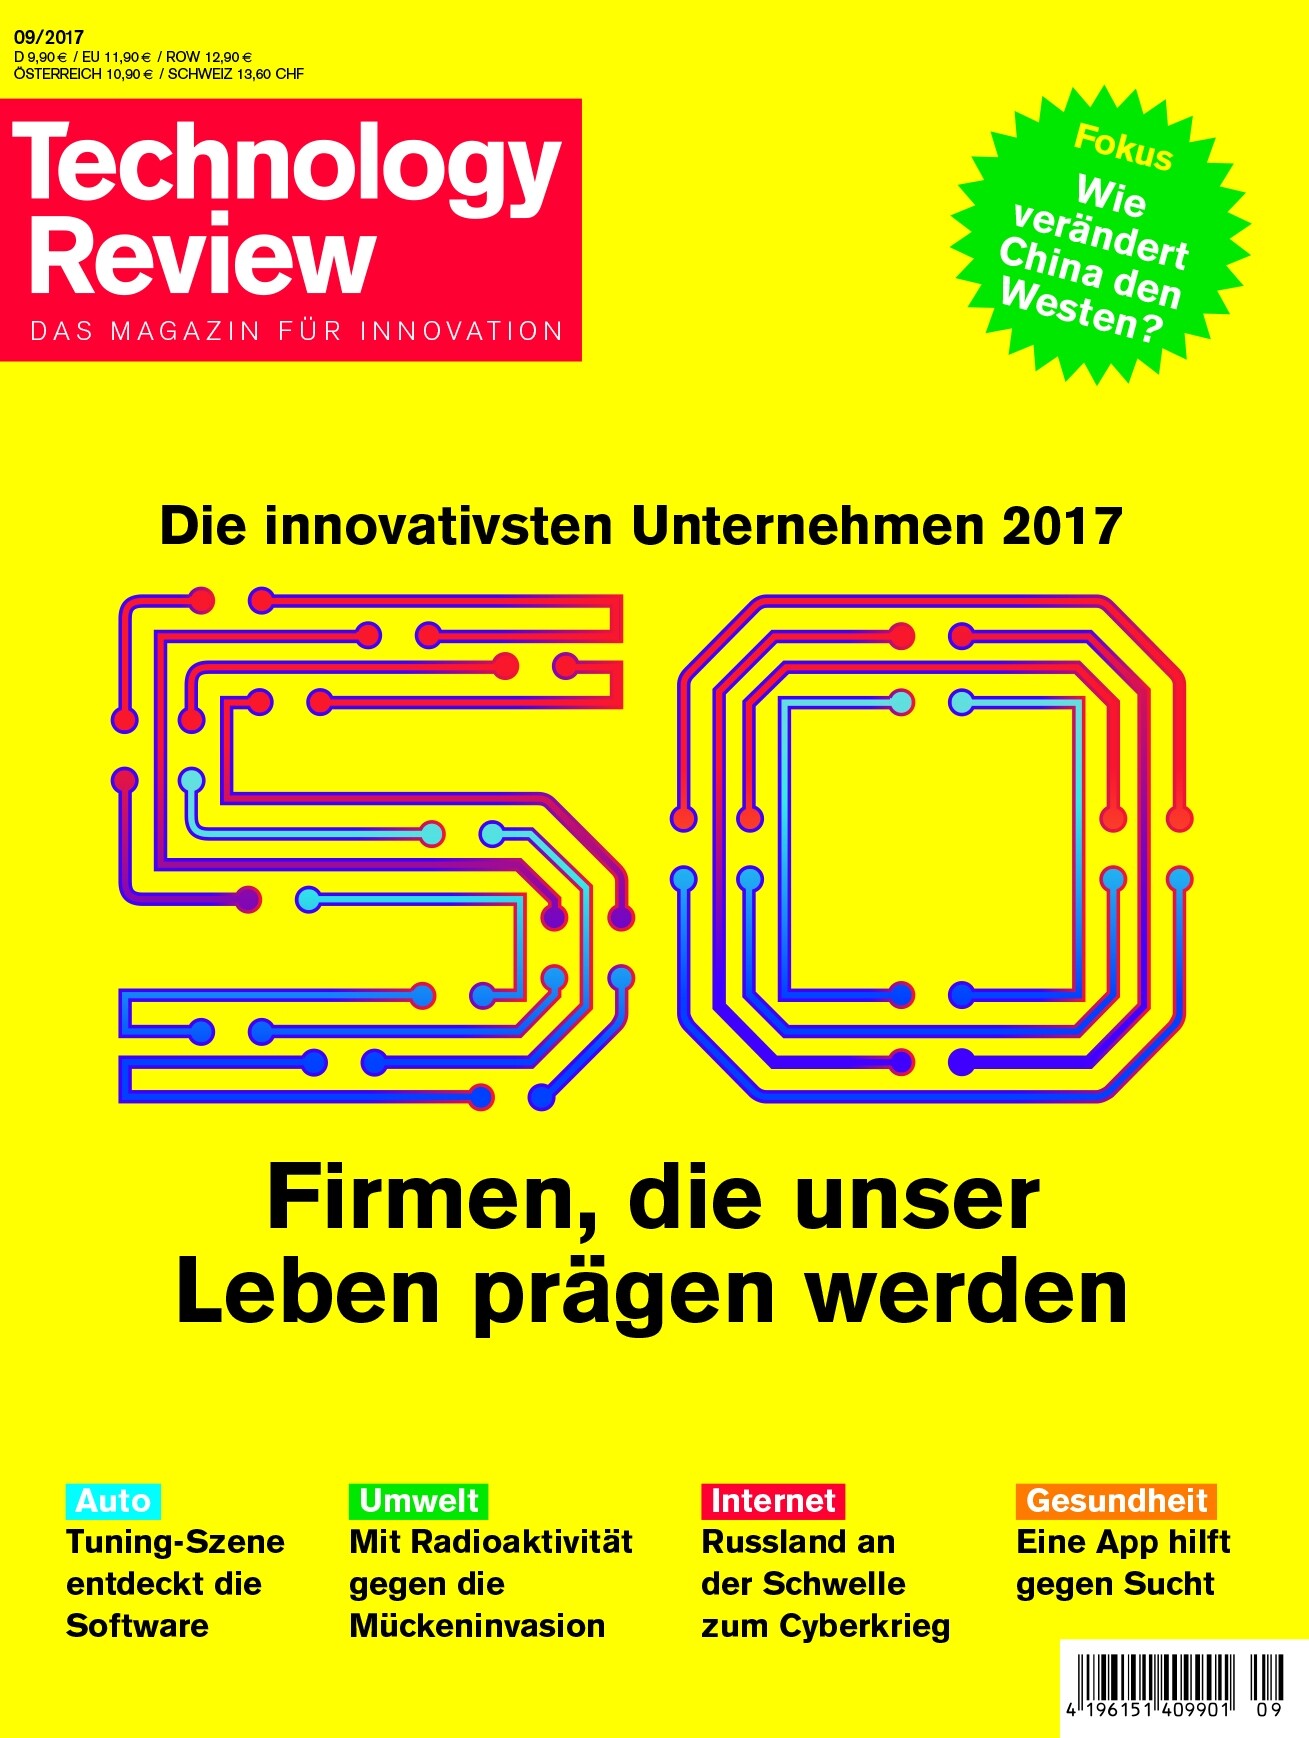 Technology Review 9/2017